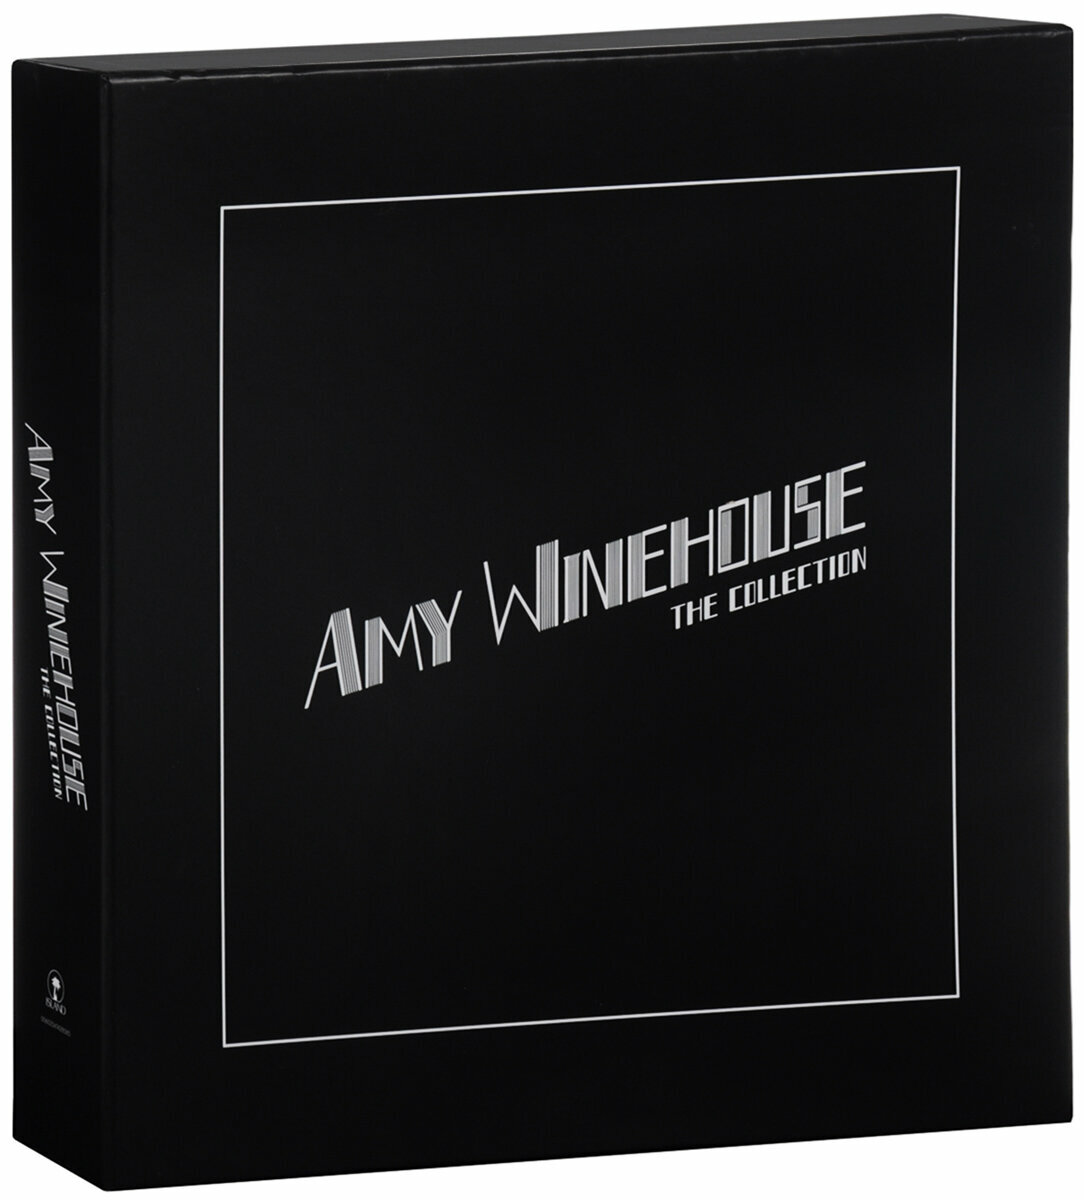 Виниловая пластинка Amy Winehouse: The Collection (180g) (Strictly Limited Box Set) (8 LP)